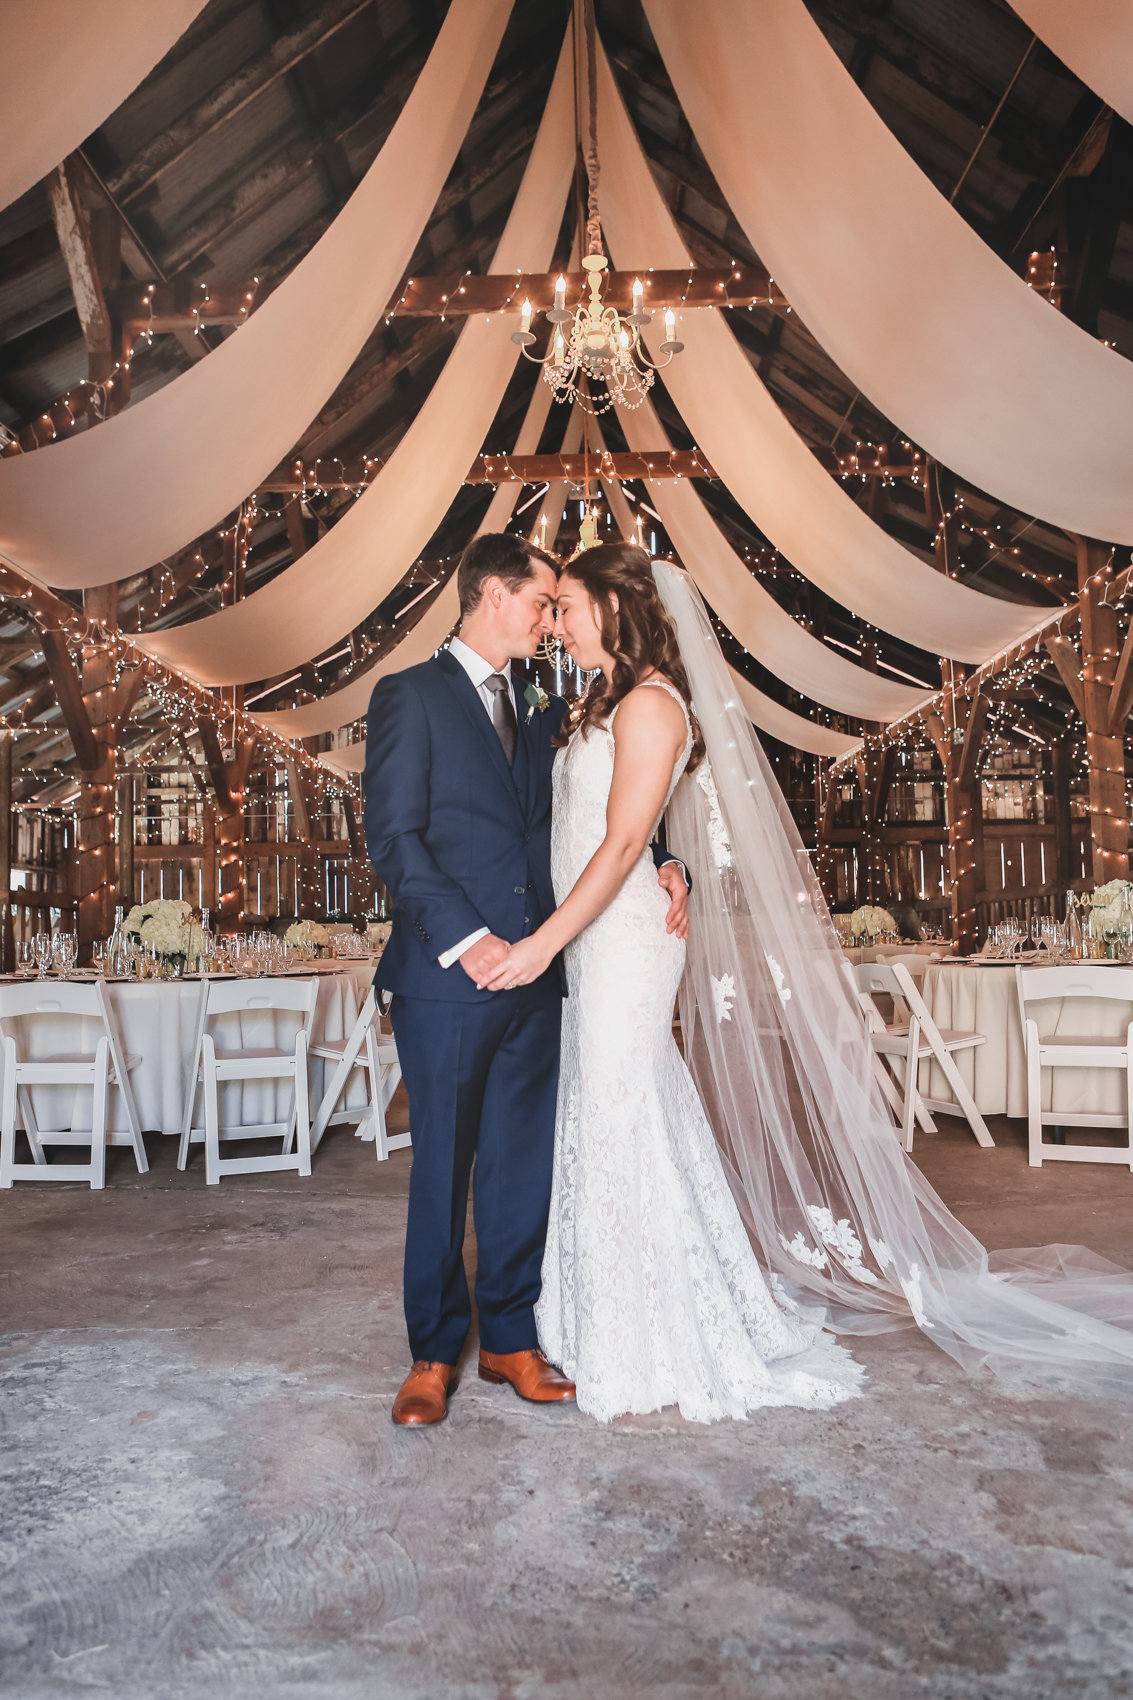 Tented rustic wedding provides beautiful backdrop for portrait of bride and groom